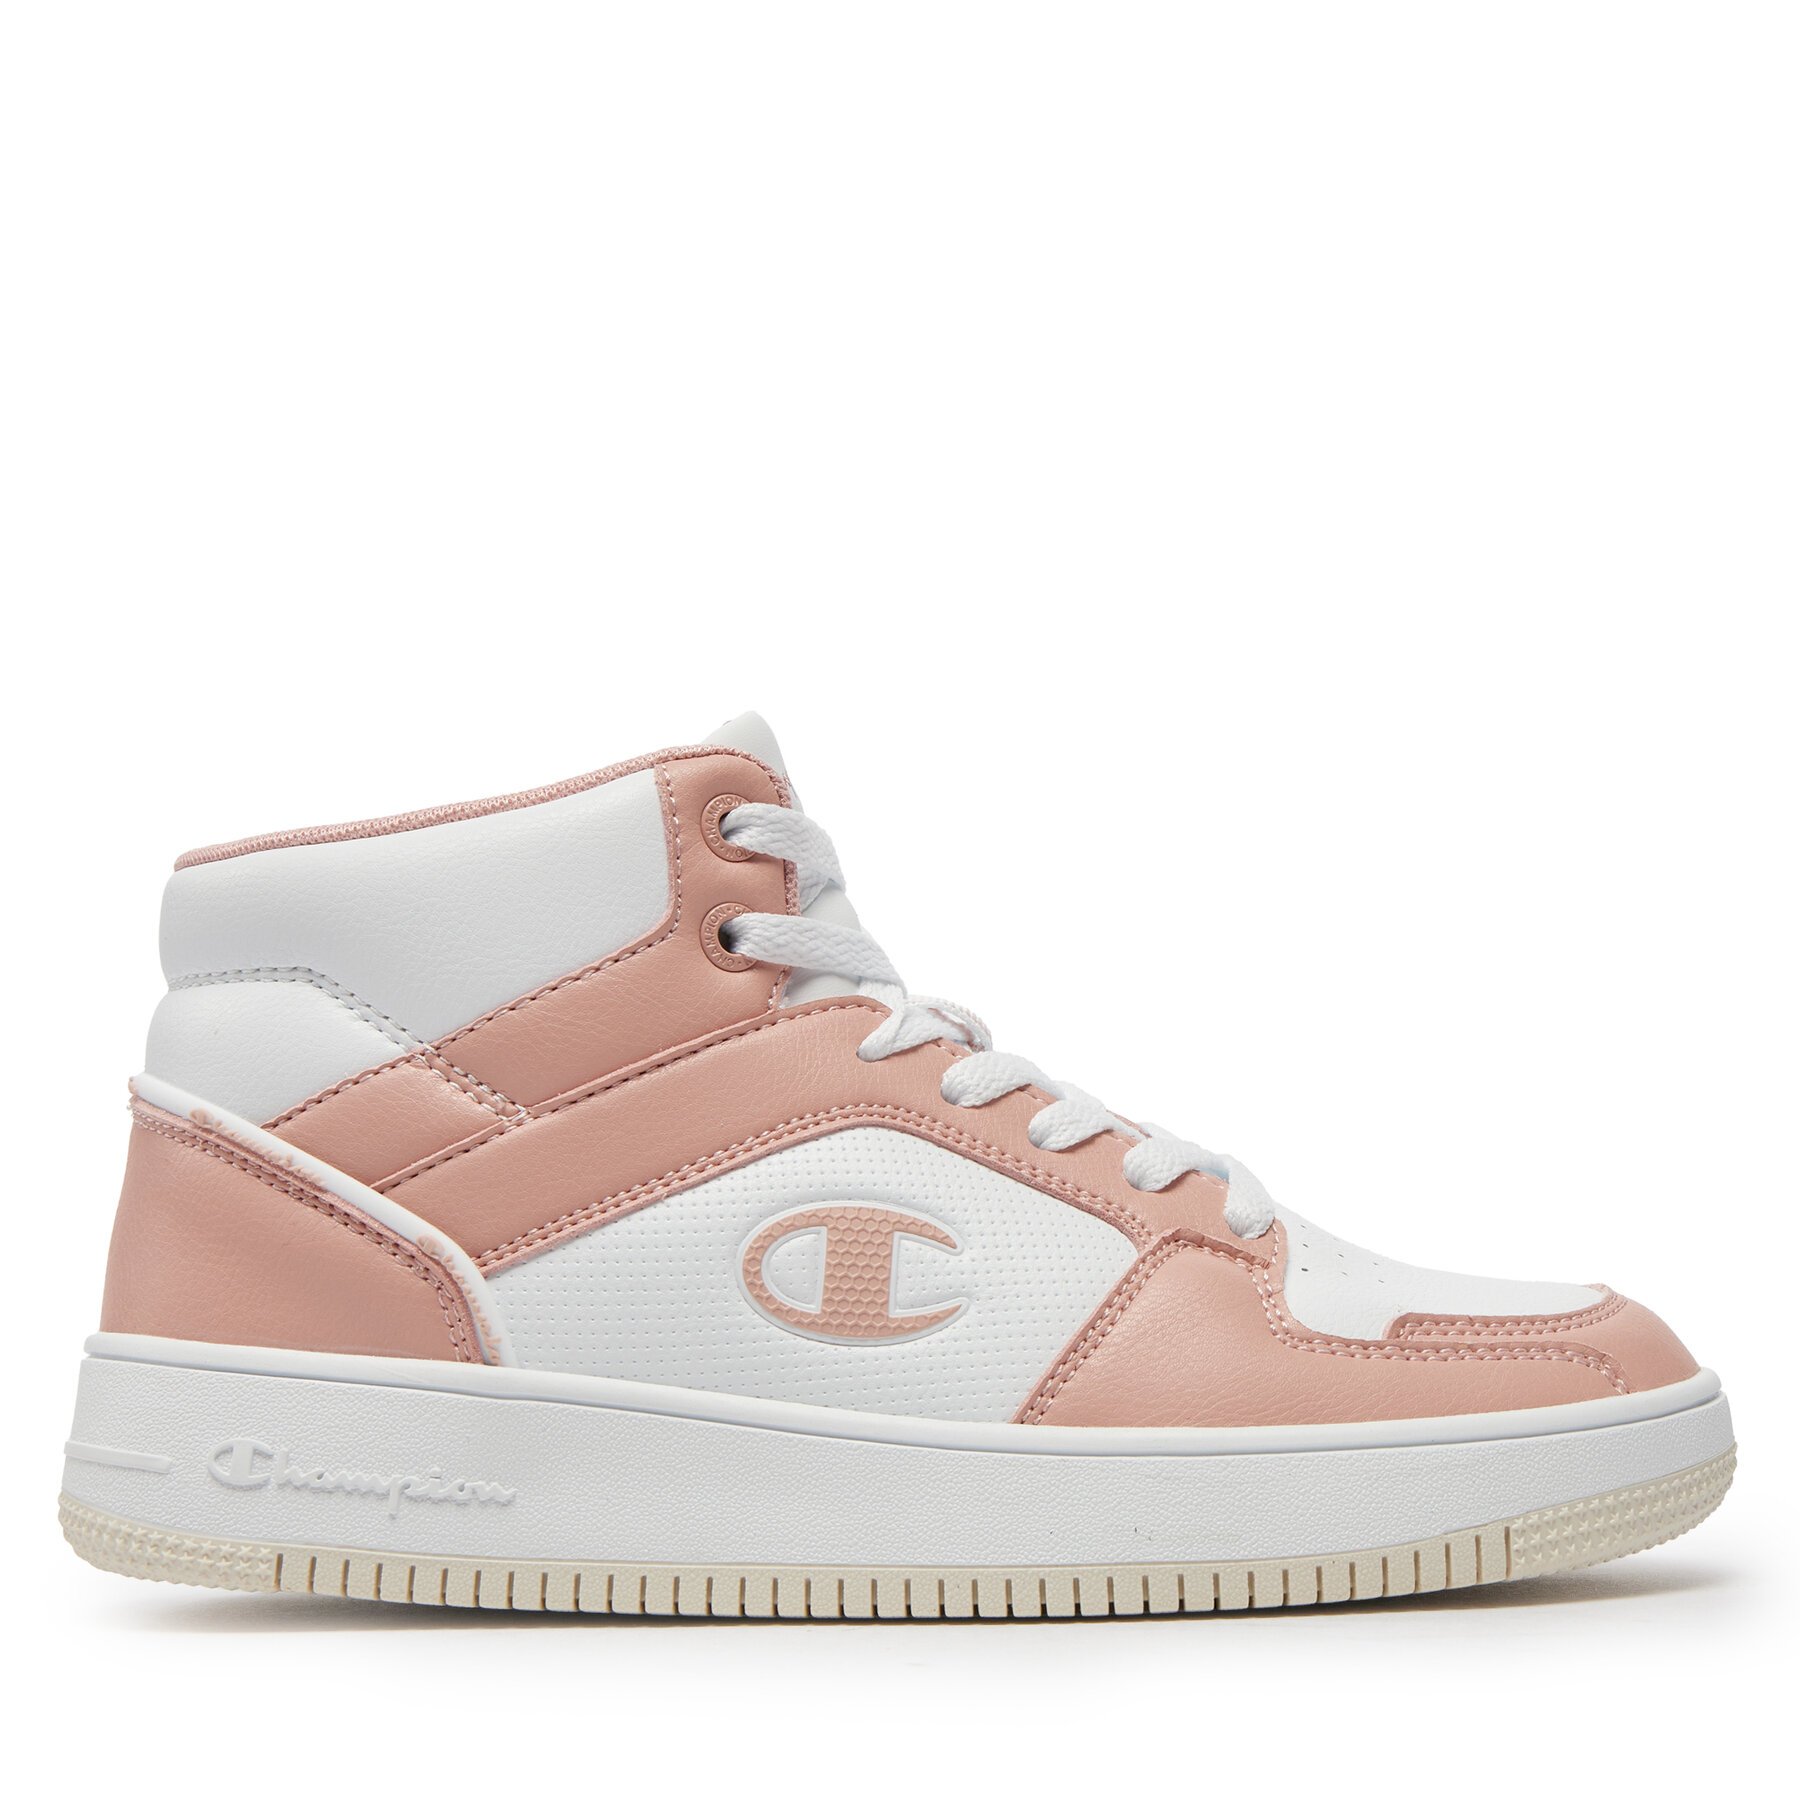 Sneakers Champion Rebound 2.0 Mid Mid Cut Shoe S11471-CHA-PS020 Pink/Ofw von Champion